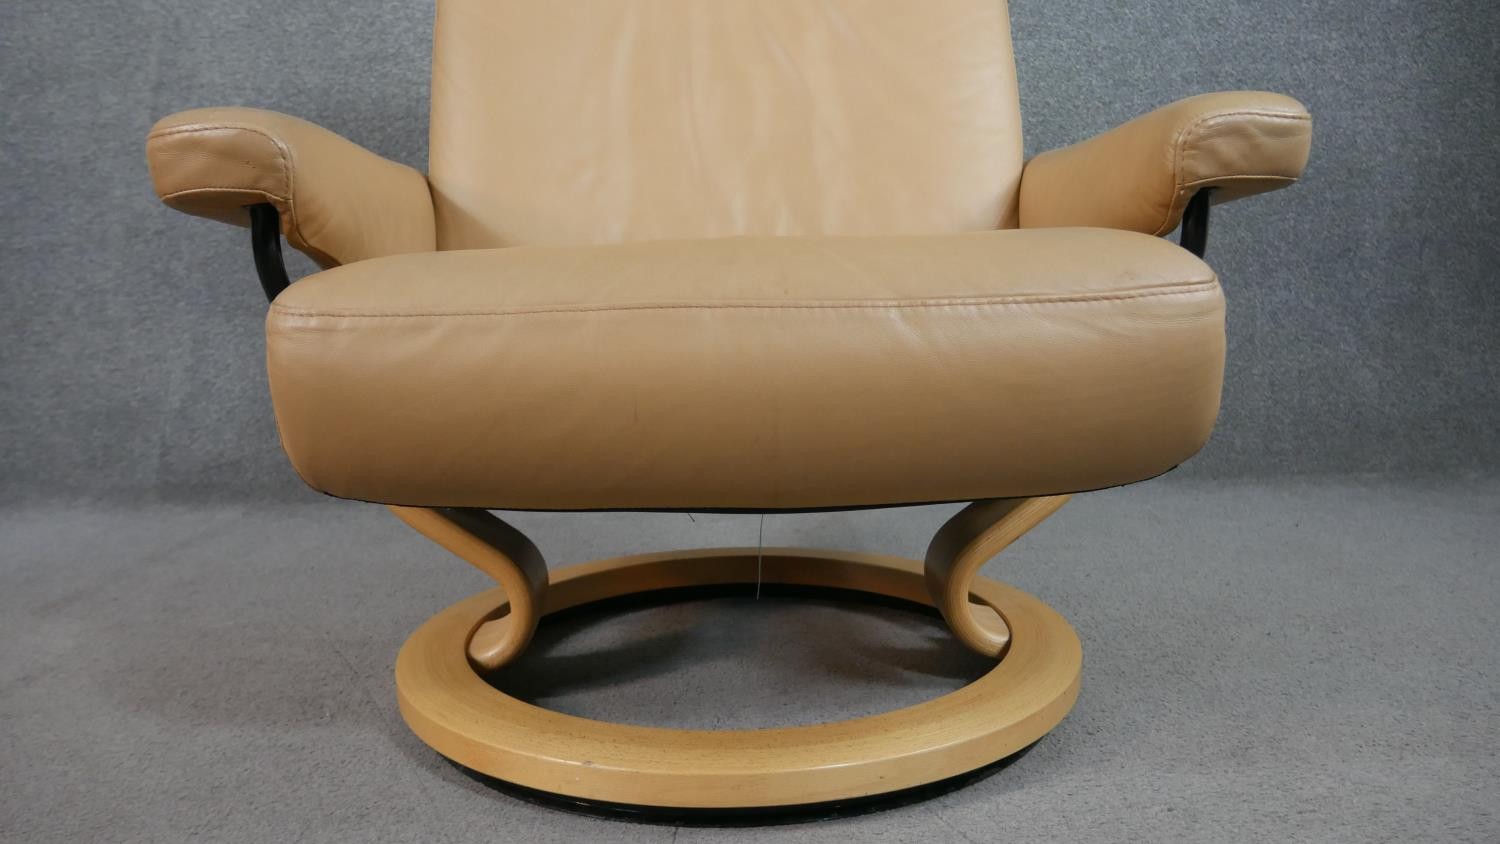 A Norwegian Ekornes Stressless chair & stool, upholstered in tan leather, with a beech frame, on - Image 3 of 11